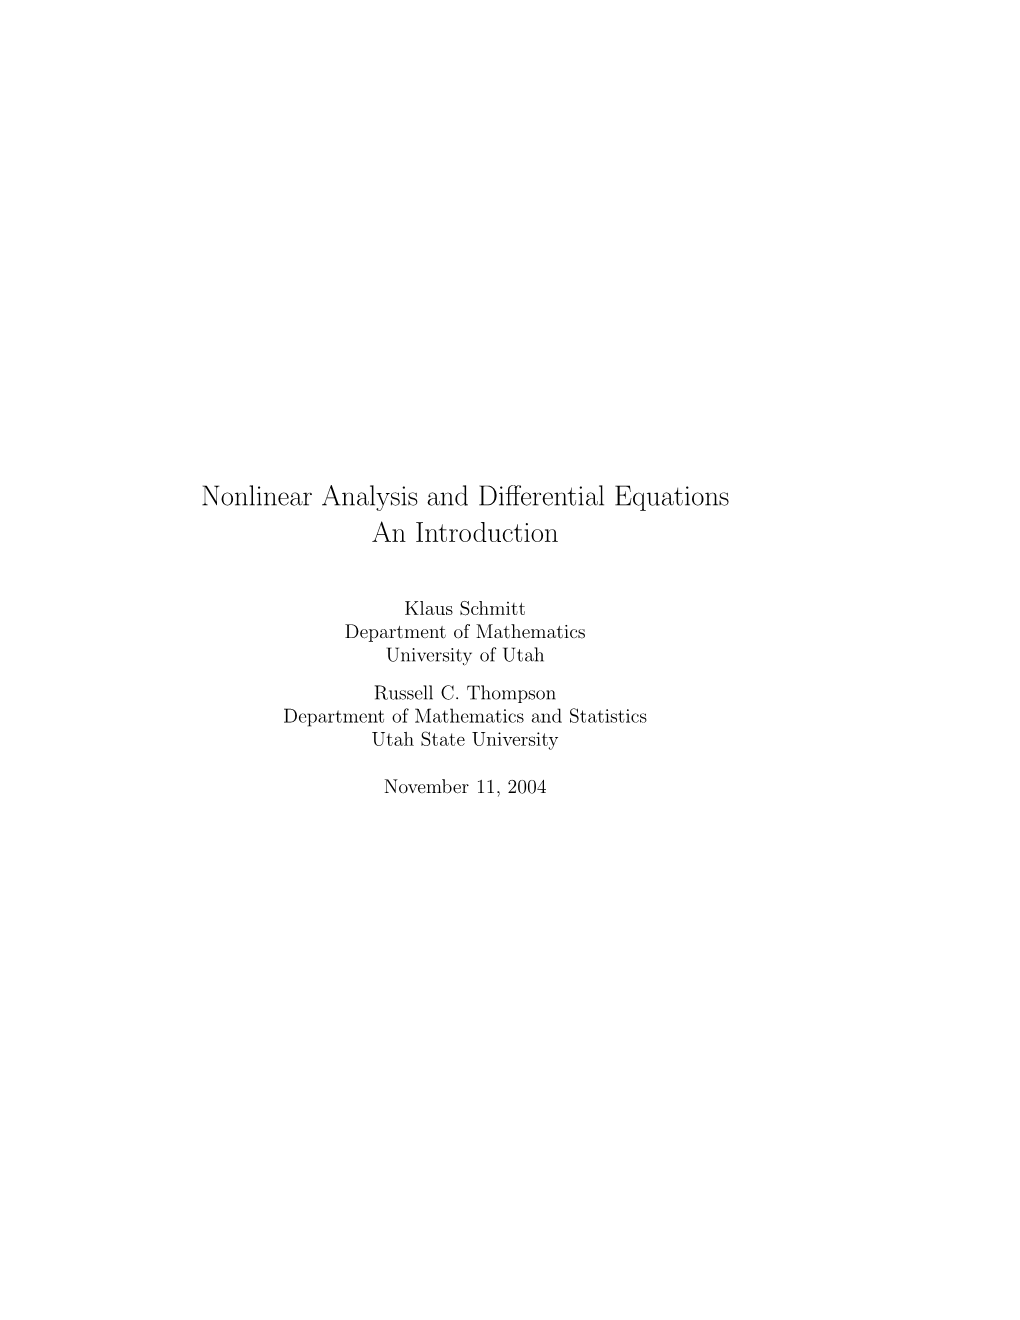 Nonlinear Analysis and Differential Equations an Introduction